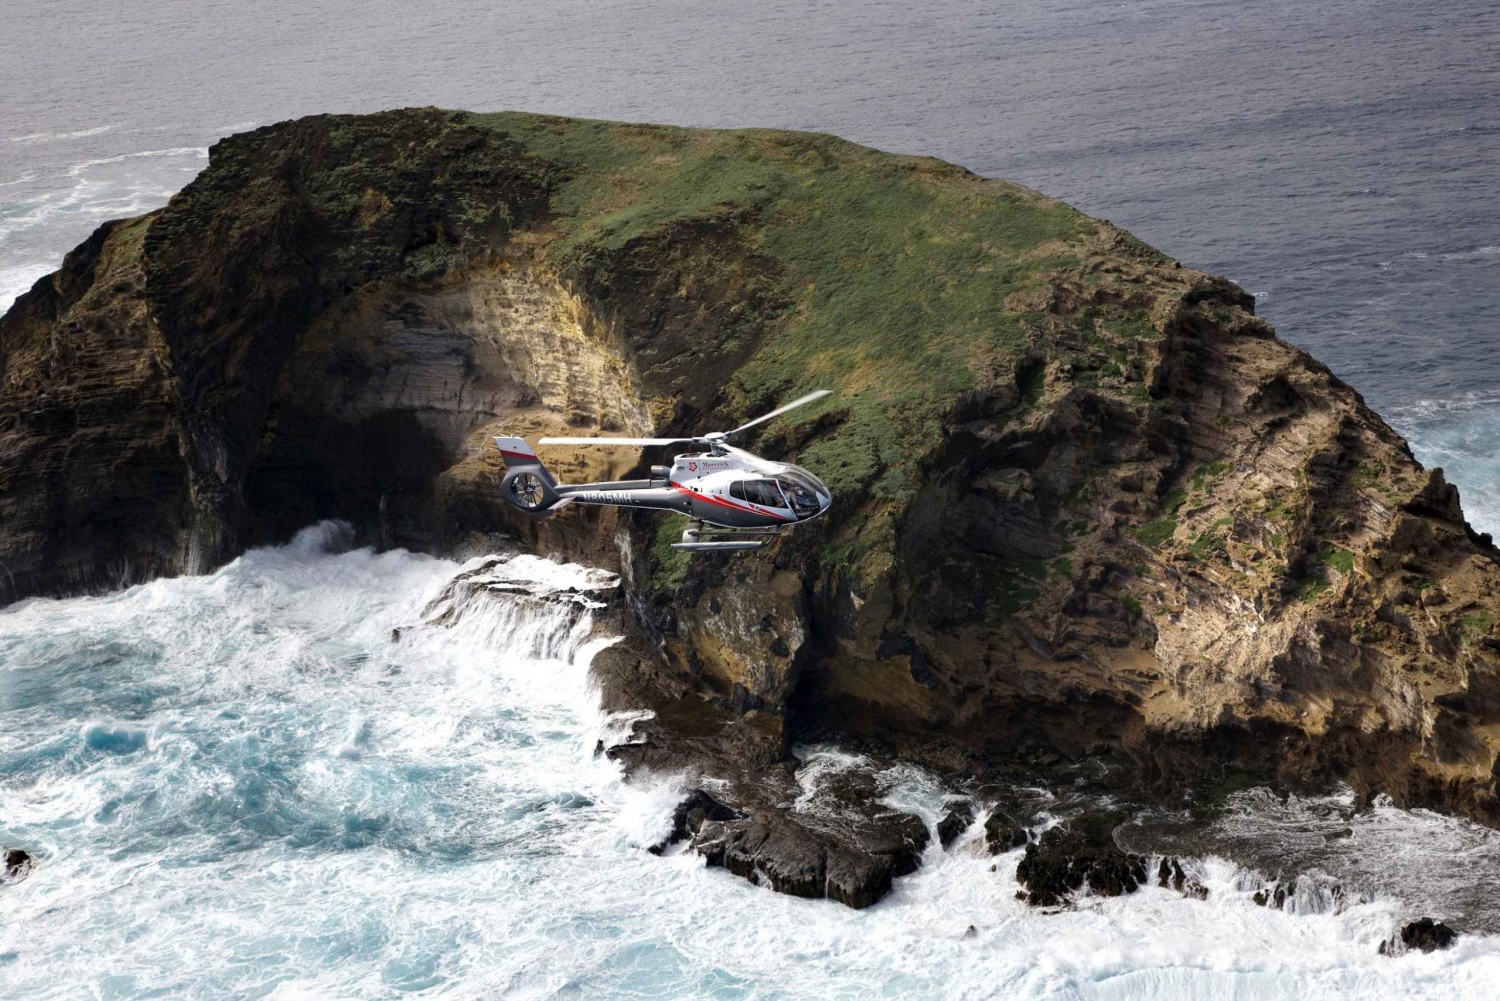 Central Maui: Two-Island Scenic Helicopter Flight to Molokai